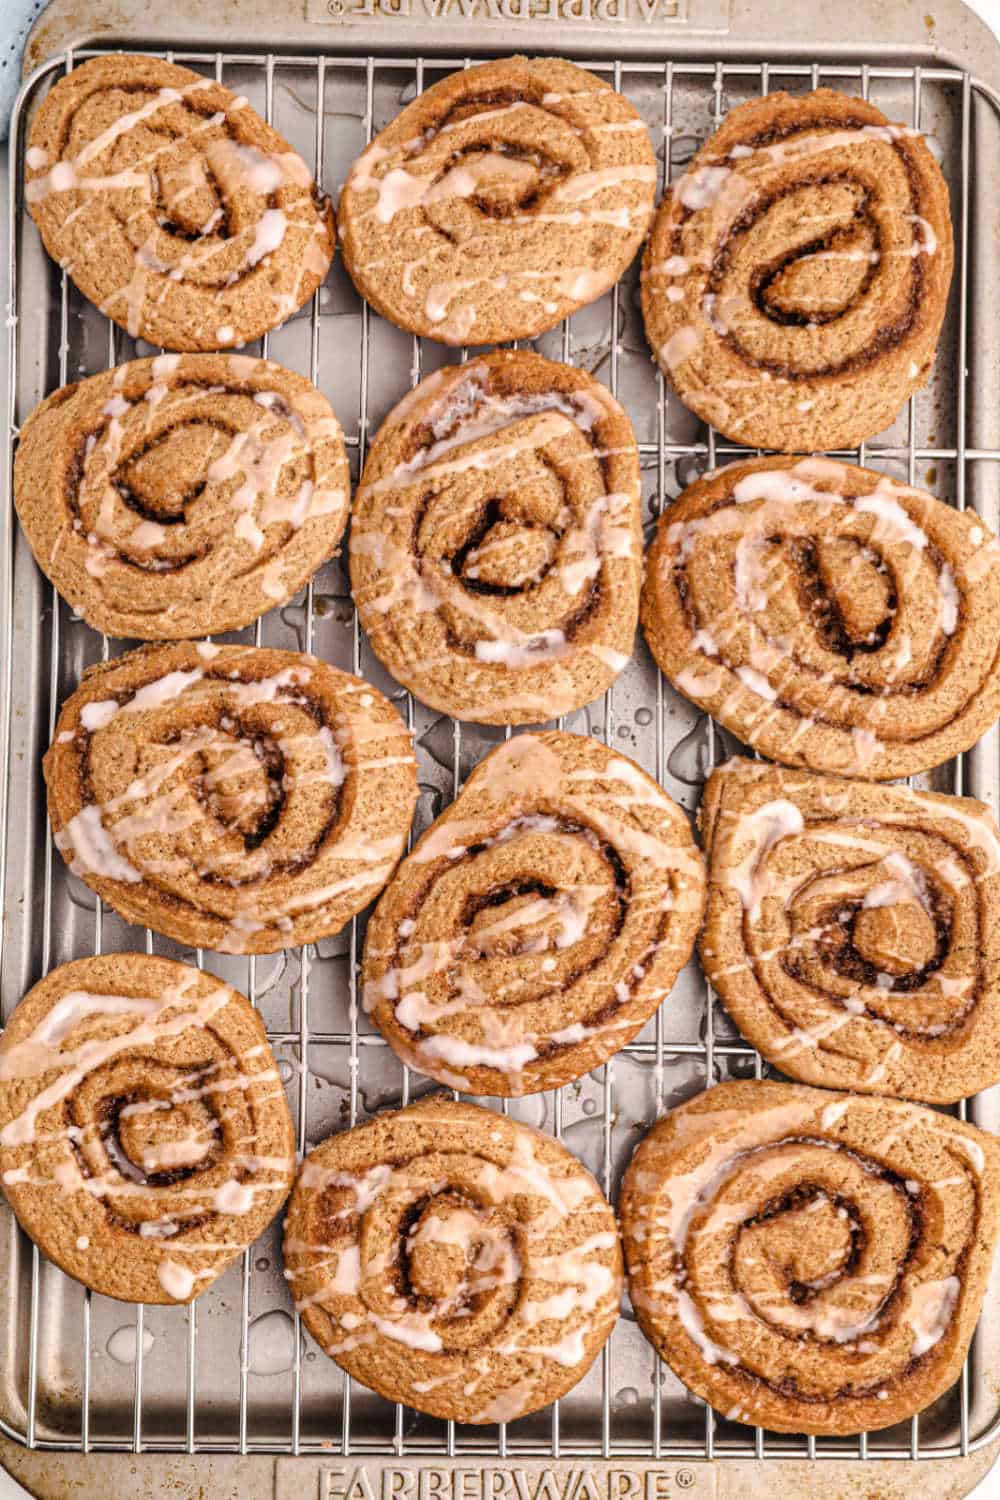 Cinnamon roll cookies on a wire rack on a baking tray